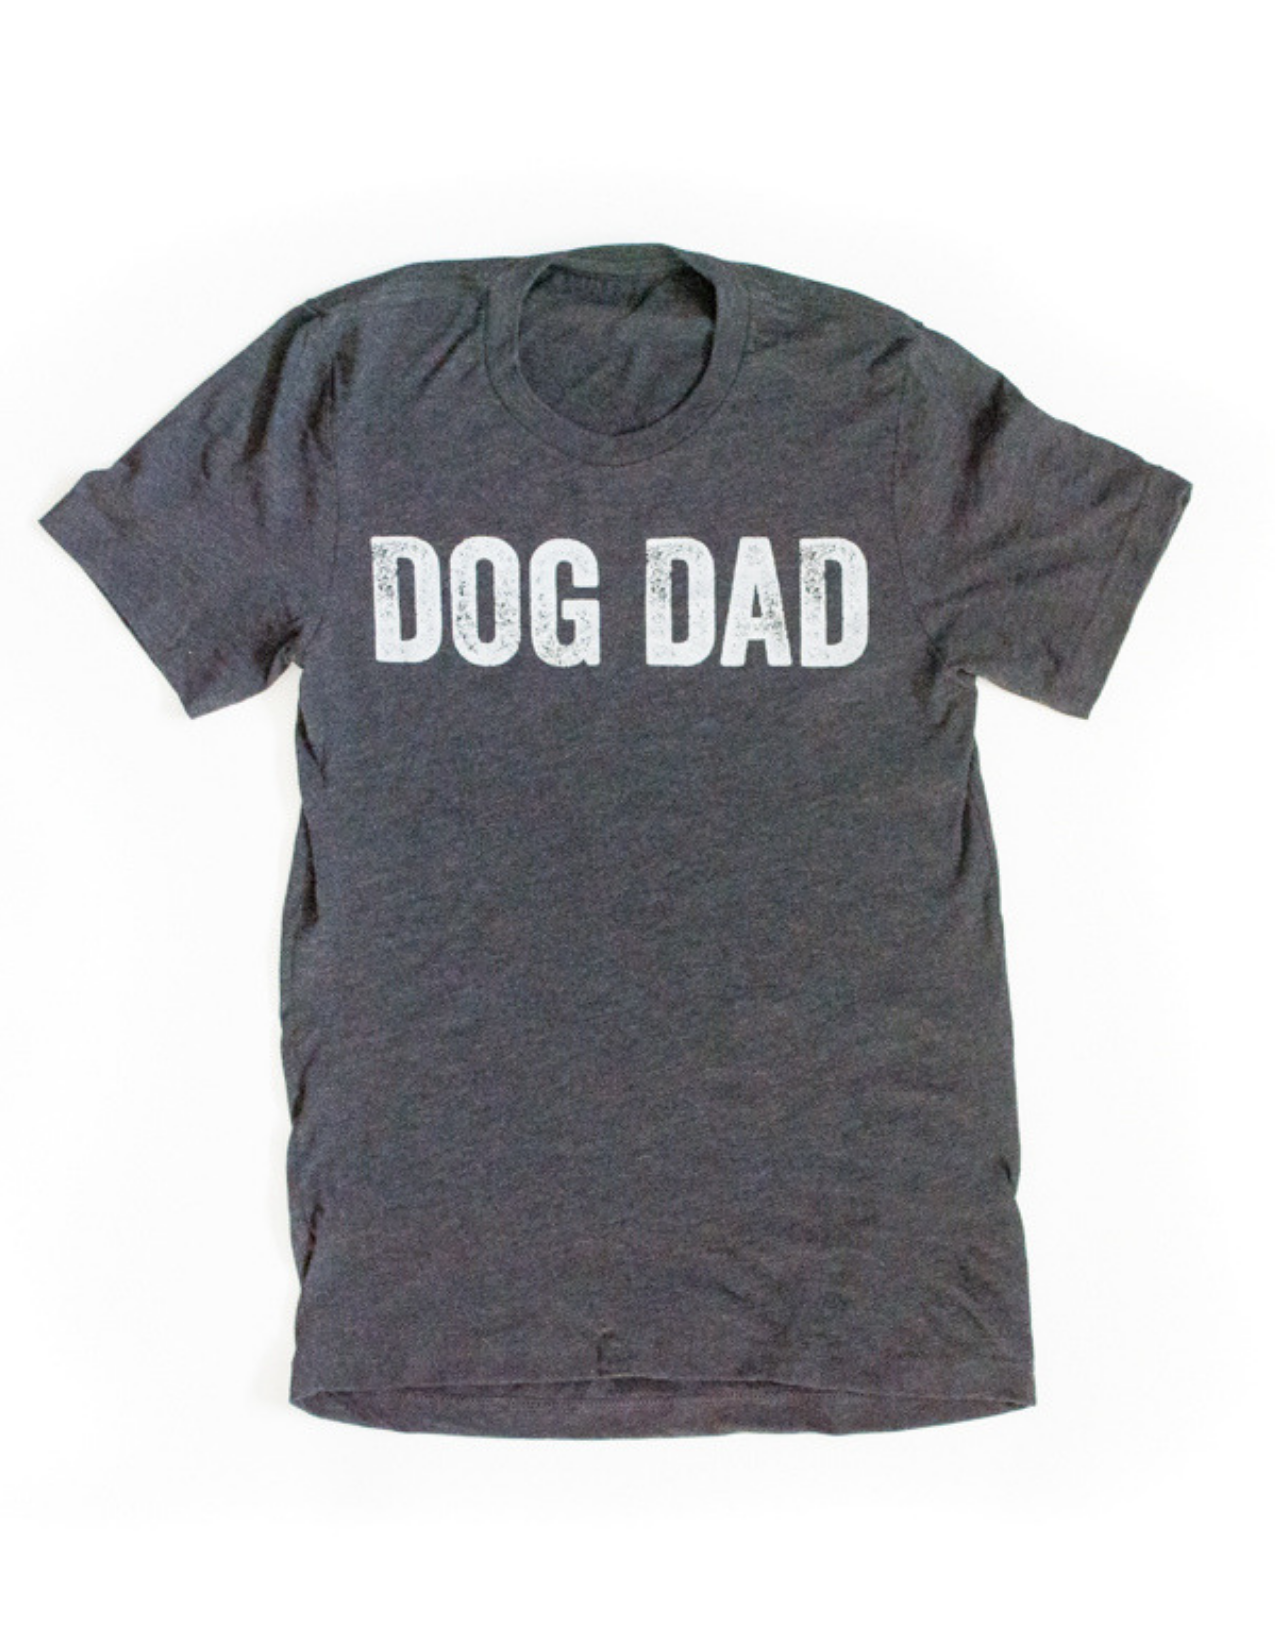 Dog Dad - Past Product 2XL ONLY